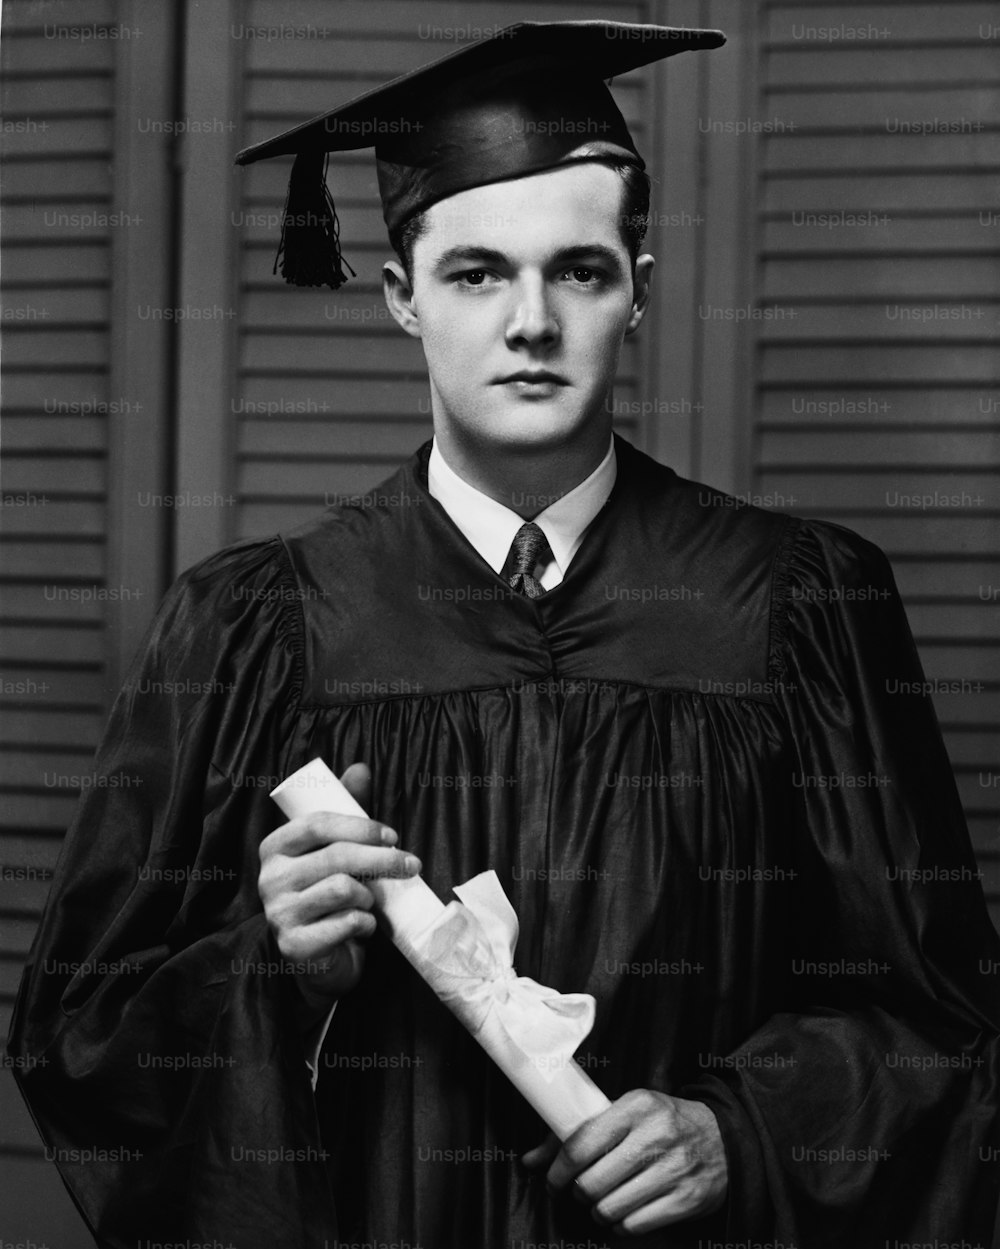 A young man in his graduation gown and mortarboard, holding his diploma, circa 1940.  (Photo by George Marks/Retrofile/Getty Images)